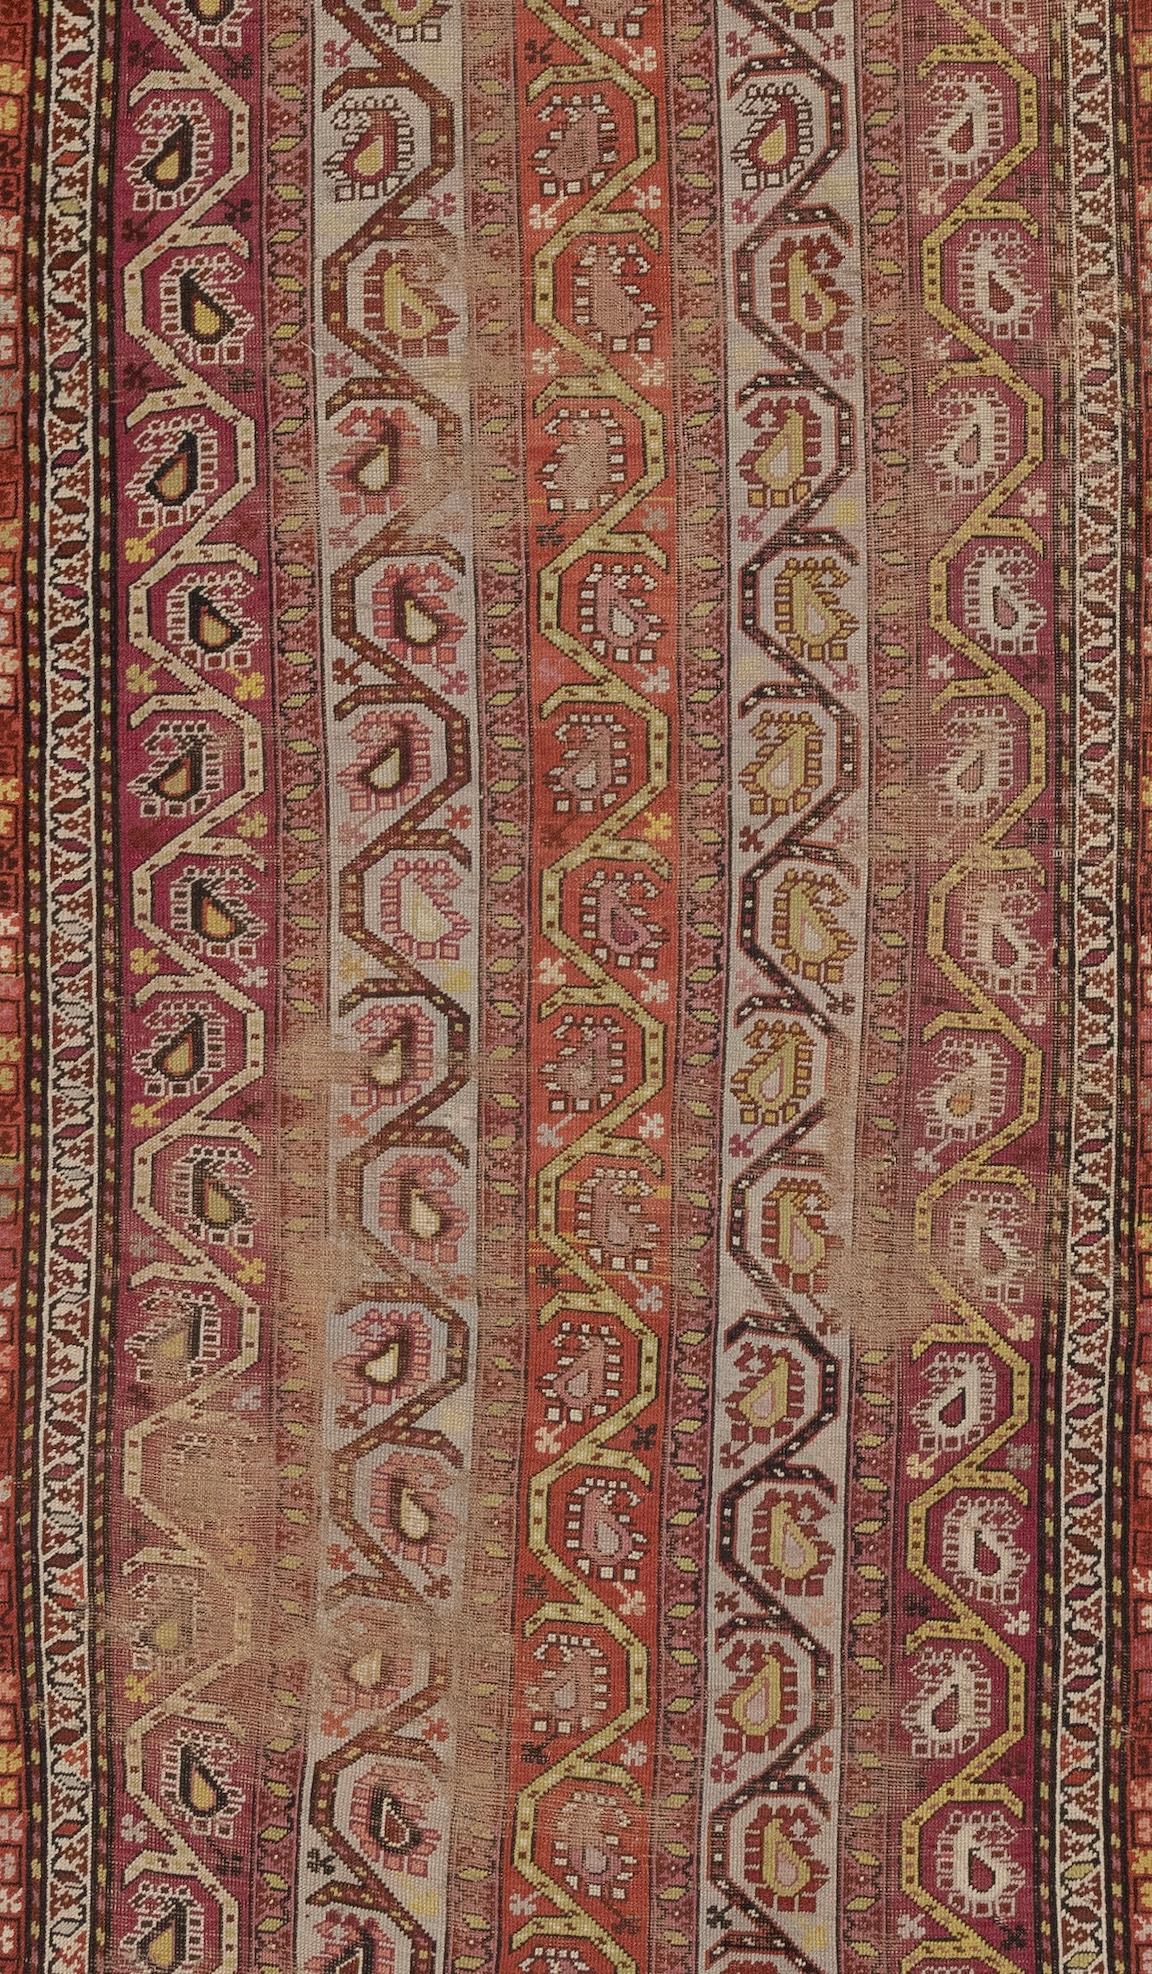 Antique Caucasian Karabagh is a type of traditional rug or carpet that originated in the Karabagh region of the Caucasus Mountains, which spans parts of modern-day Azerbaijan and Armenia. These rugs are known for their bold and vibrant colors,